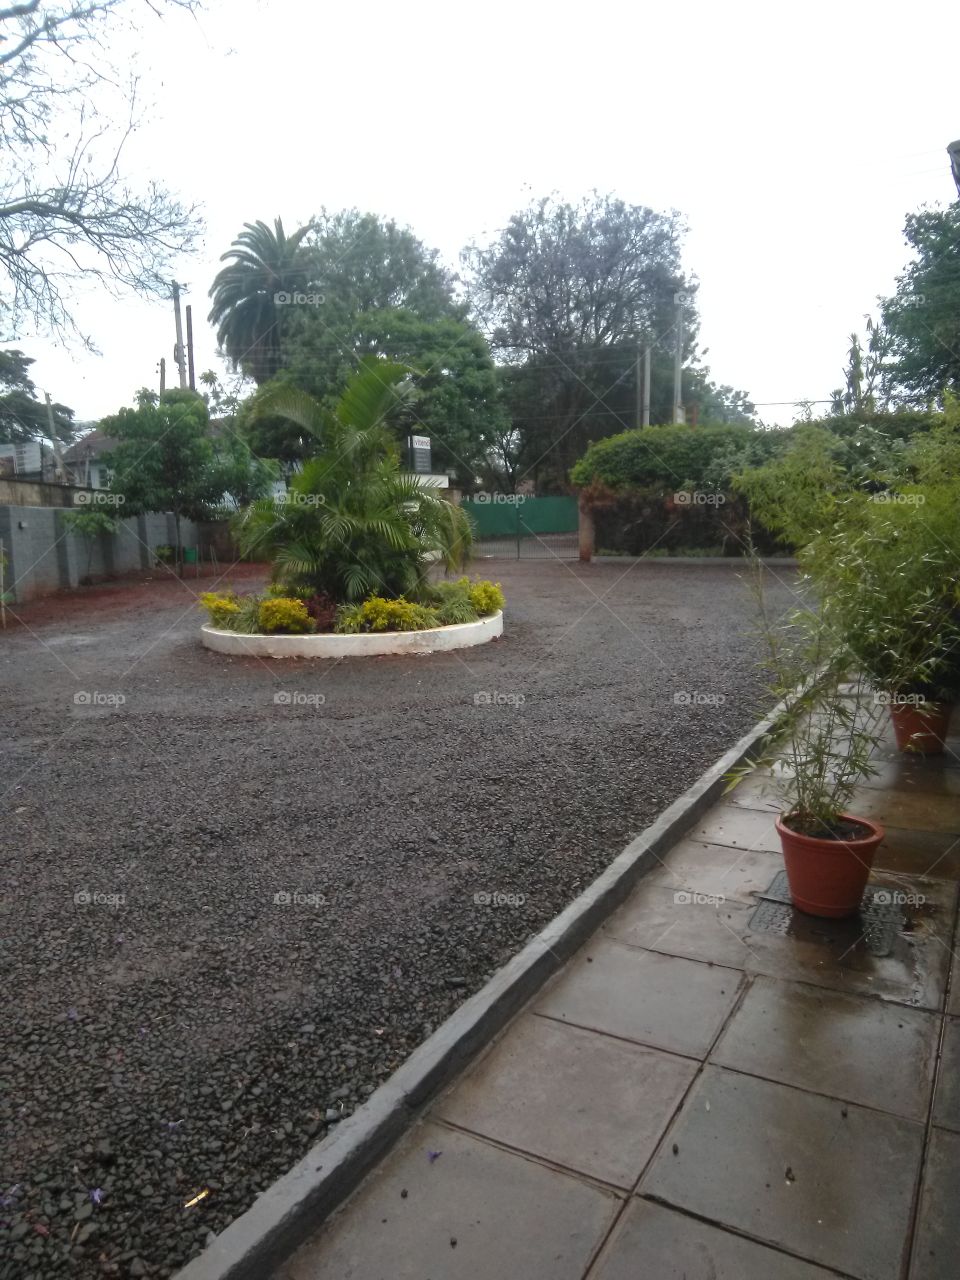 A beautiful and well maintained compound with healthy green flowers and trees on a rainy morning.